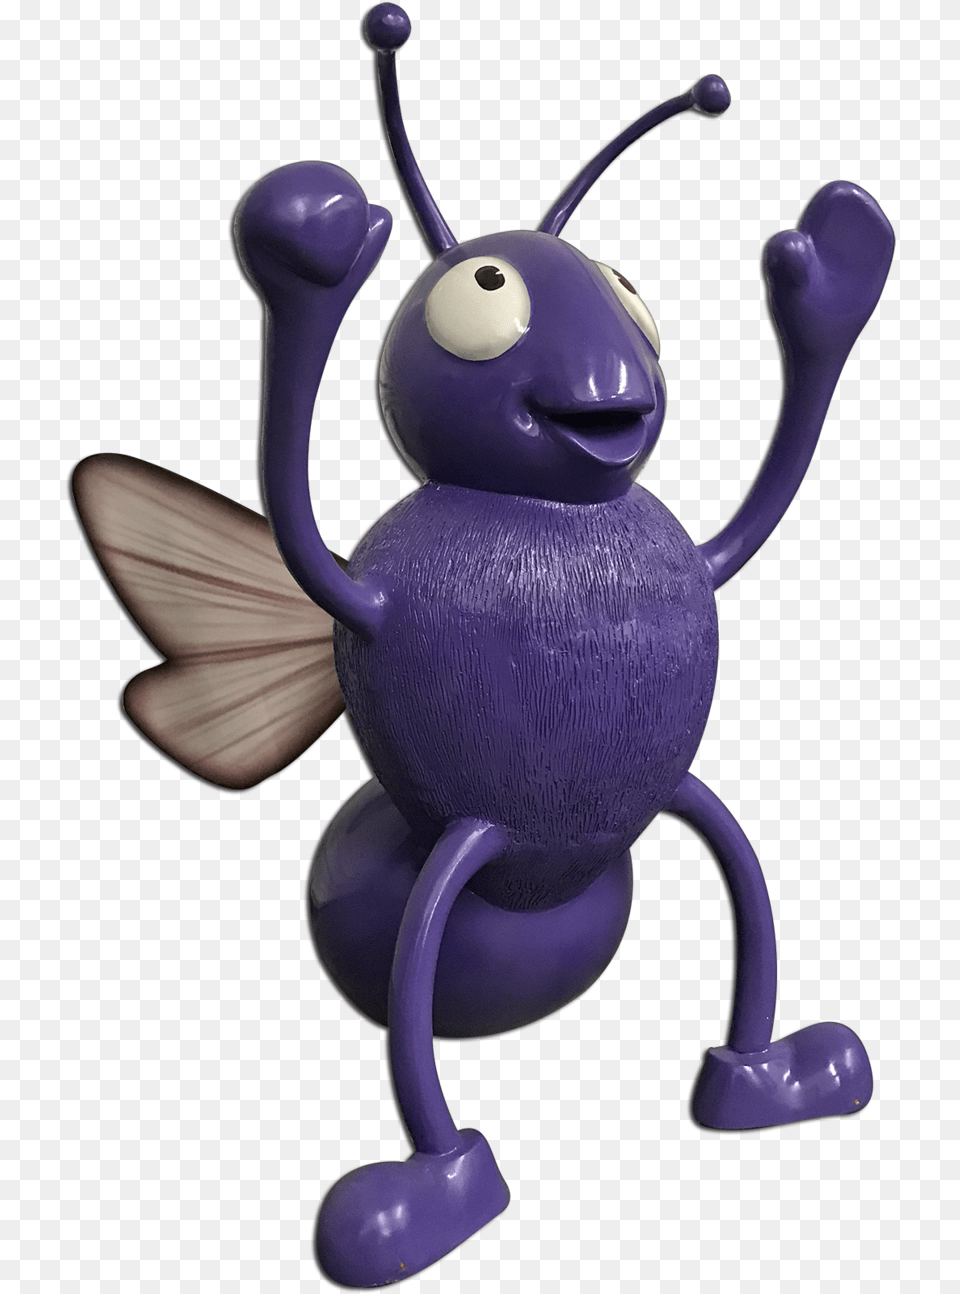 Purple Flying Bug Figurine, Toy, Animal, Ant, Insect Png Image